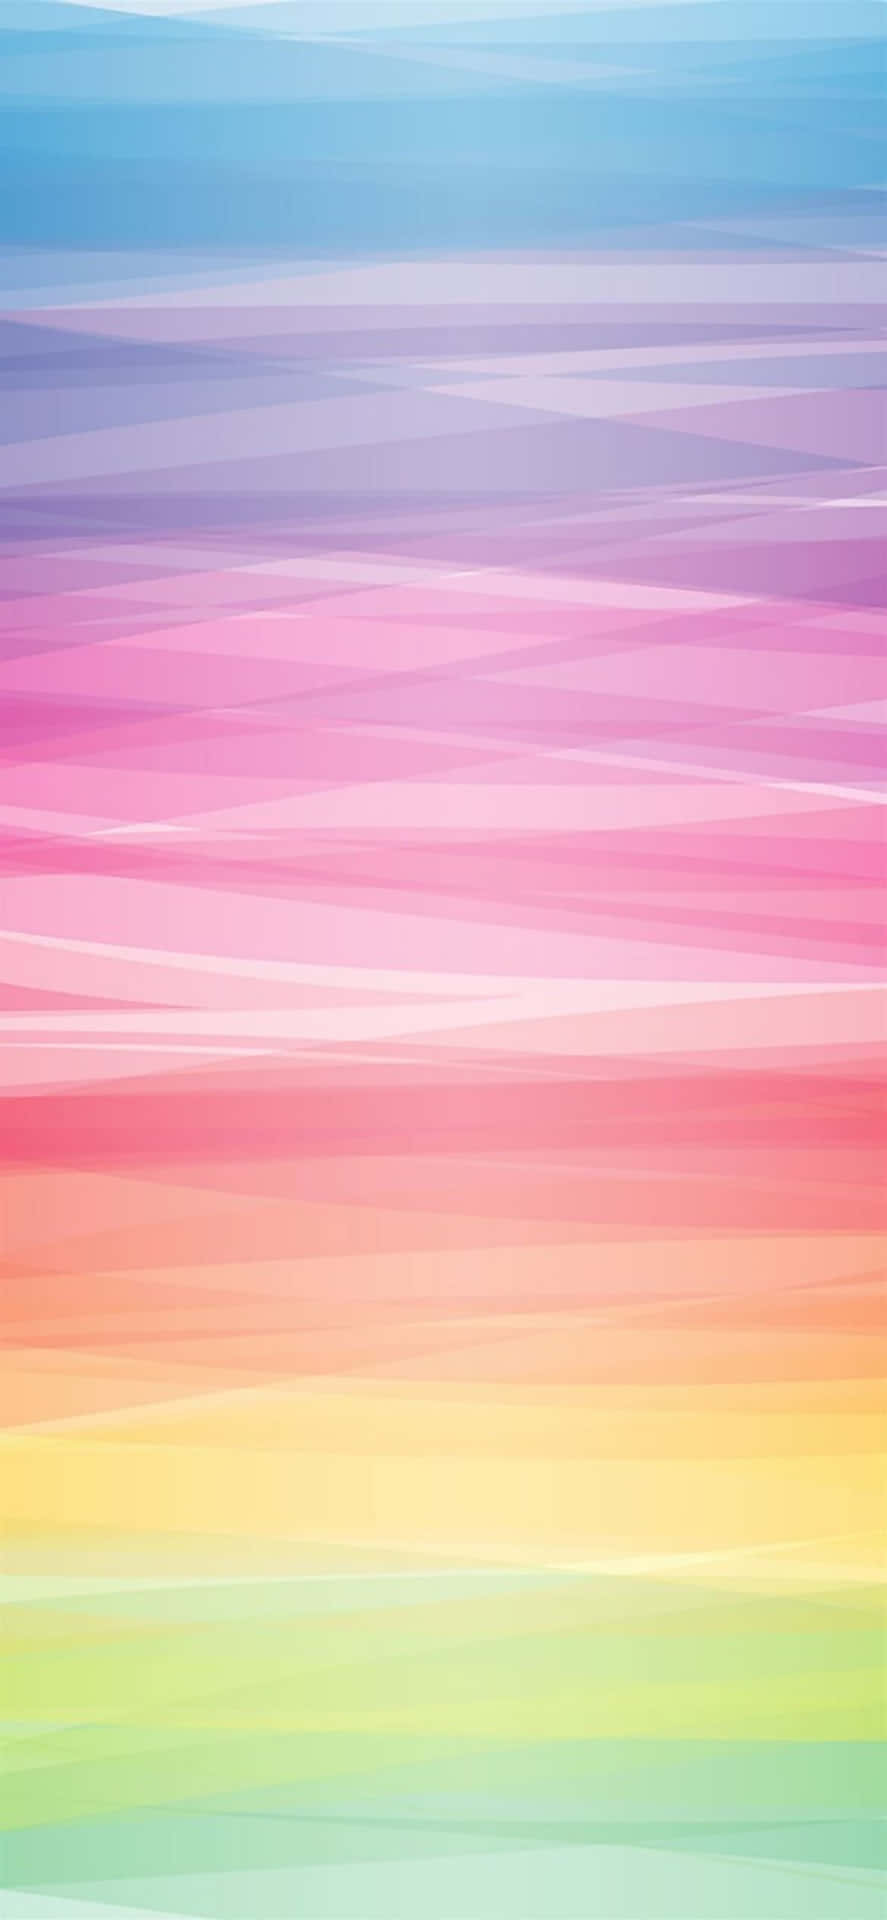 Enjoy the colorful vibes of a pastel rainbow-themed iPhone Wallpaper